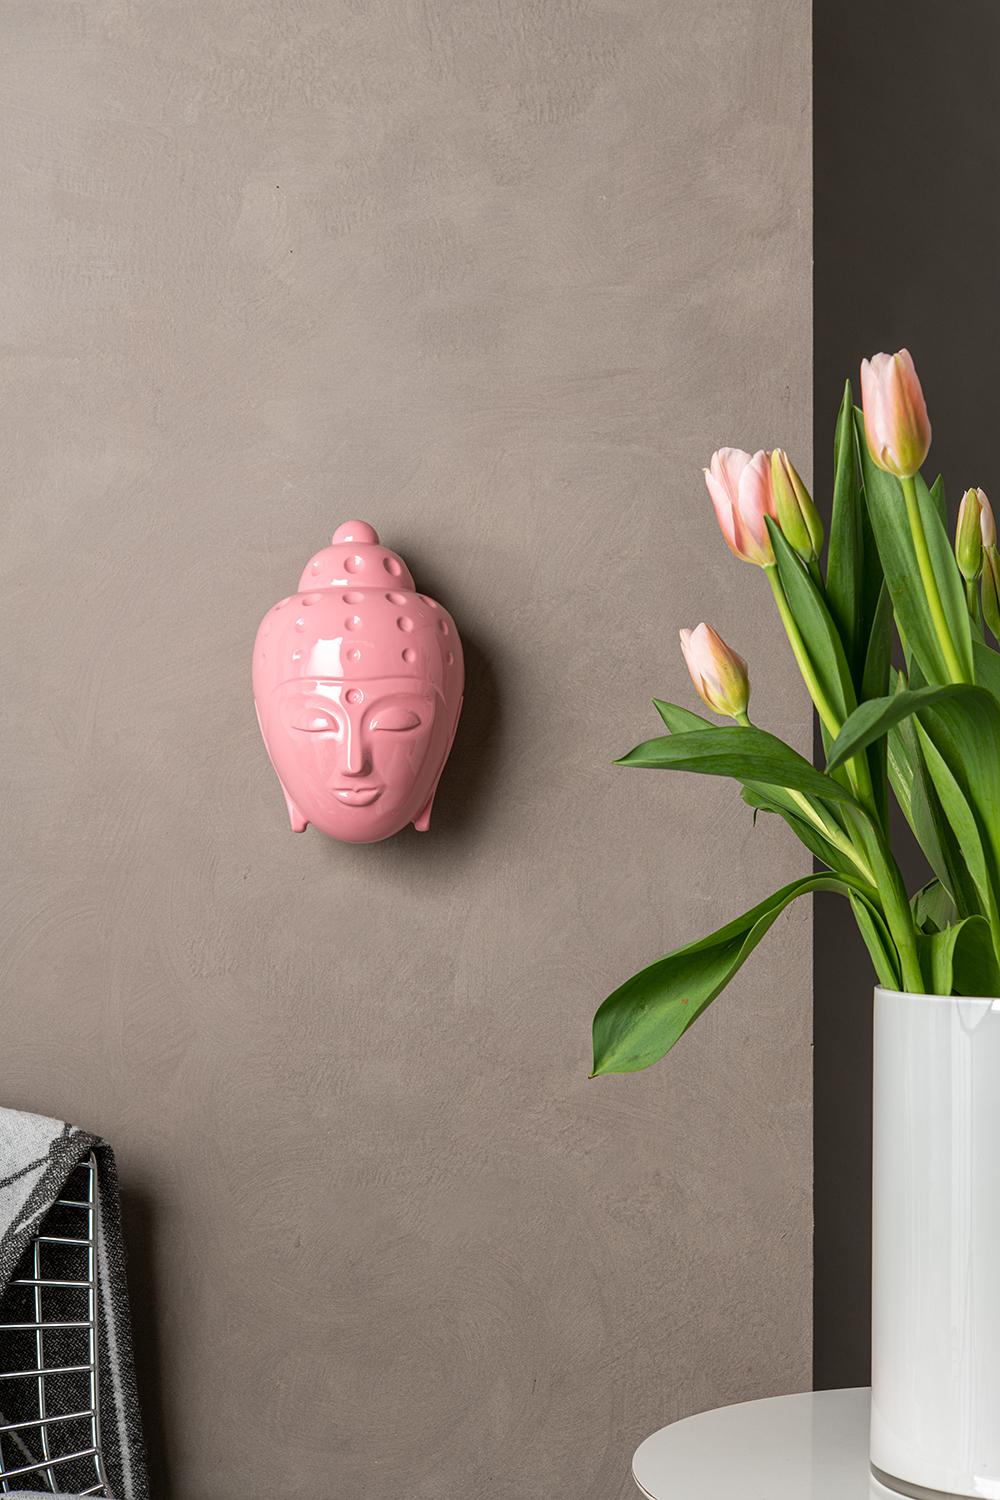 Tal Nehoray Figurative Sculpture - Contemporary buddha head figurative sculpture - painted in pink car paint